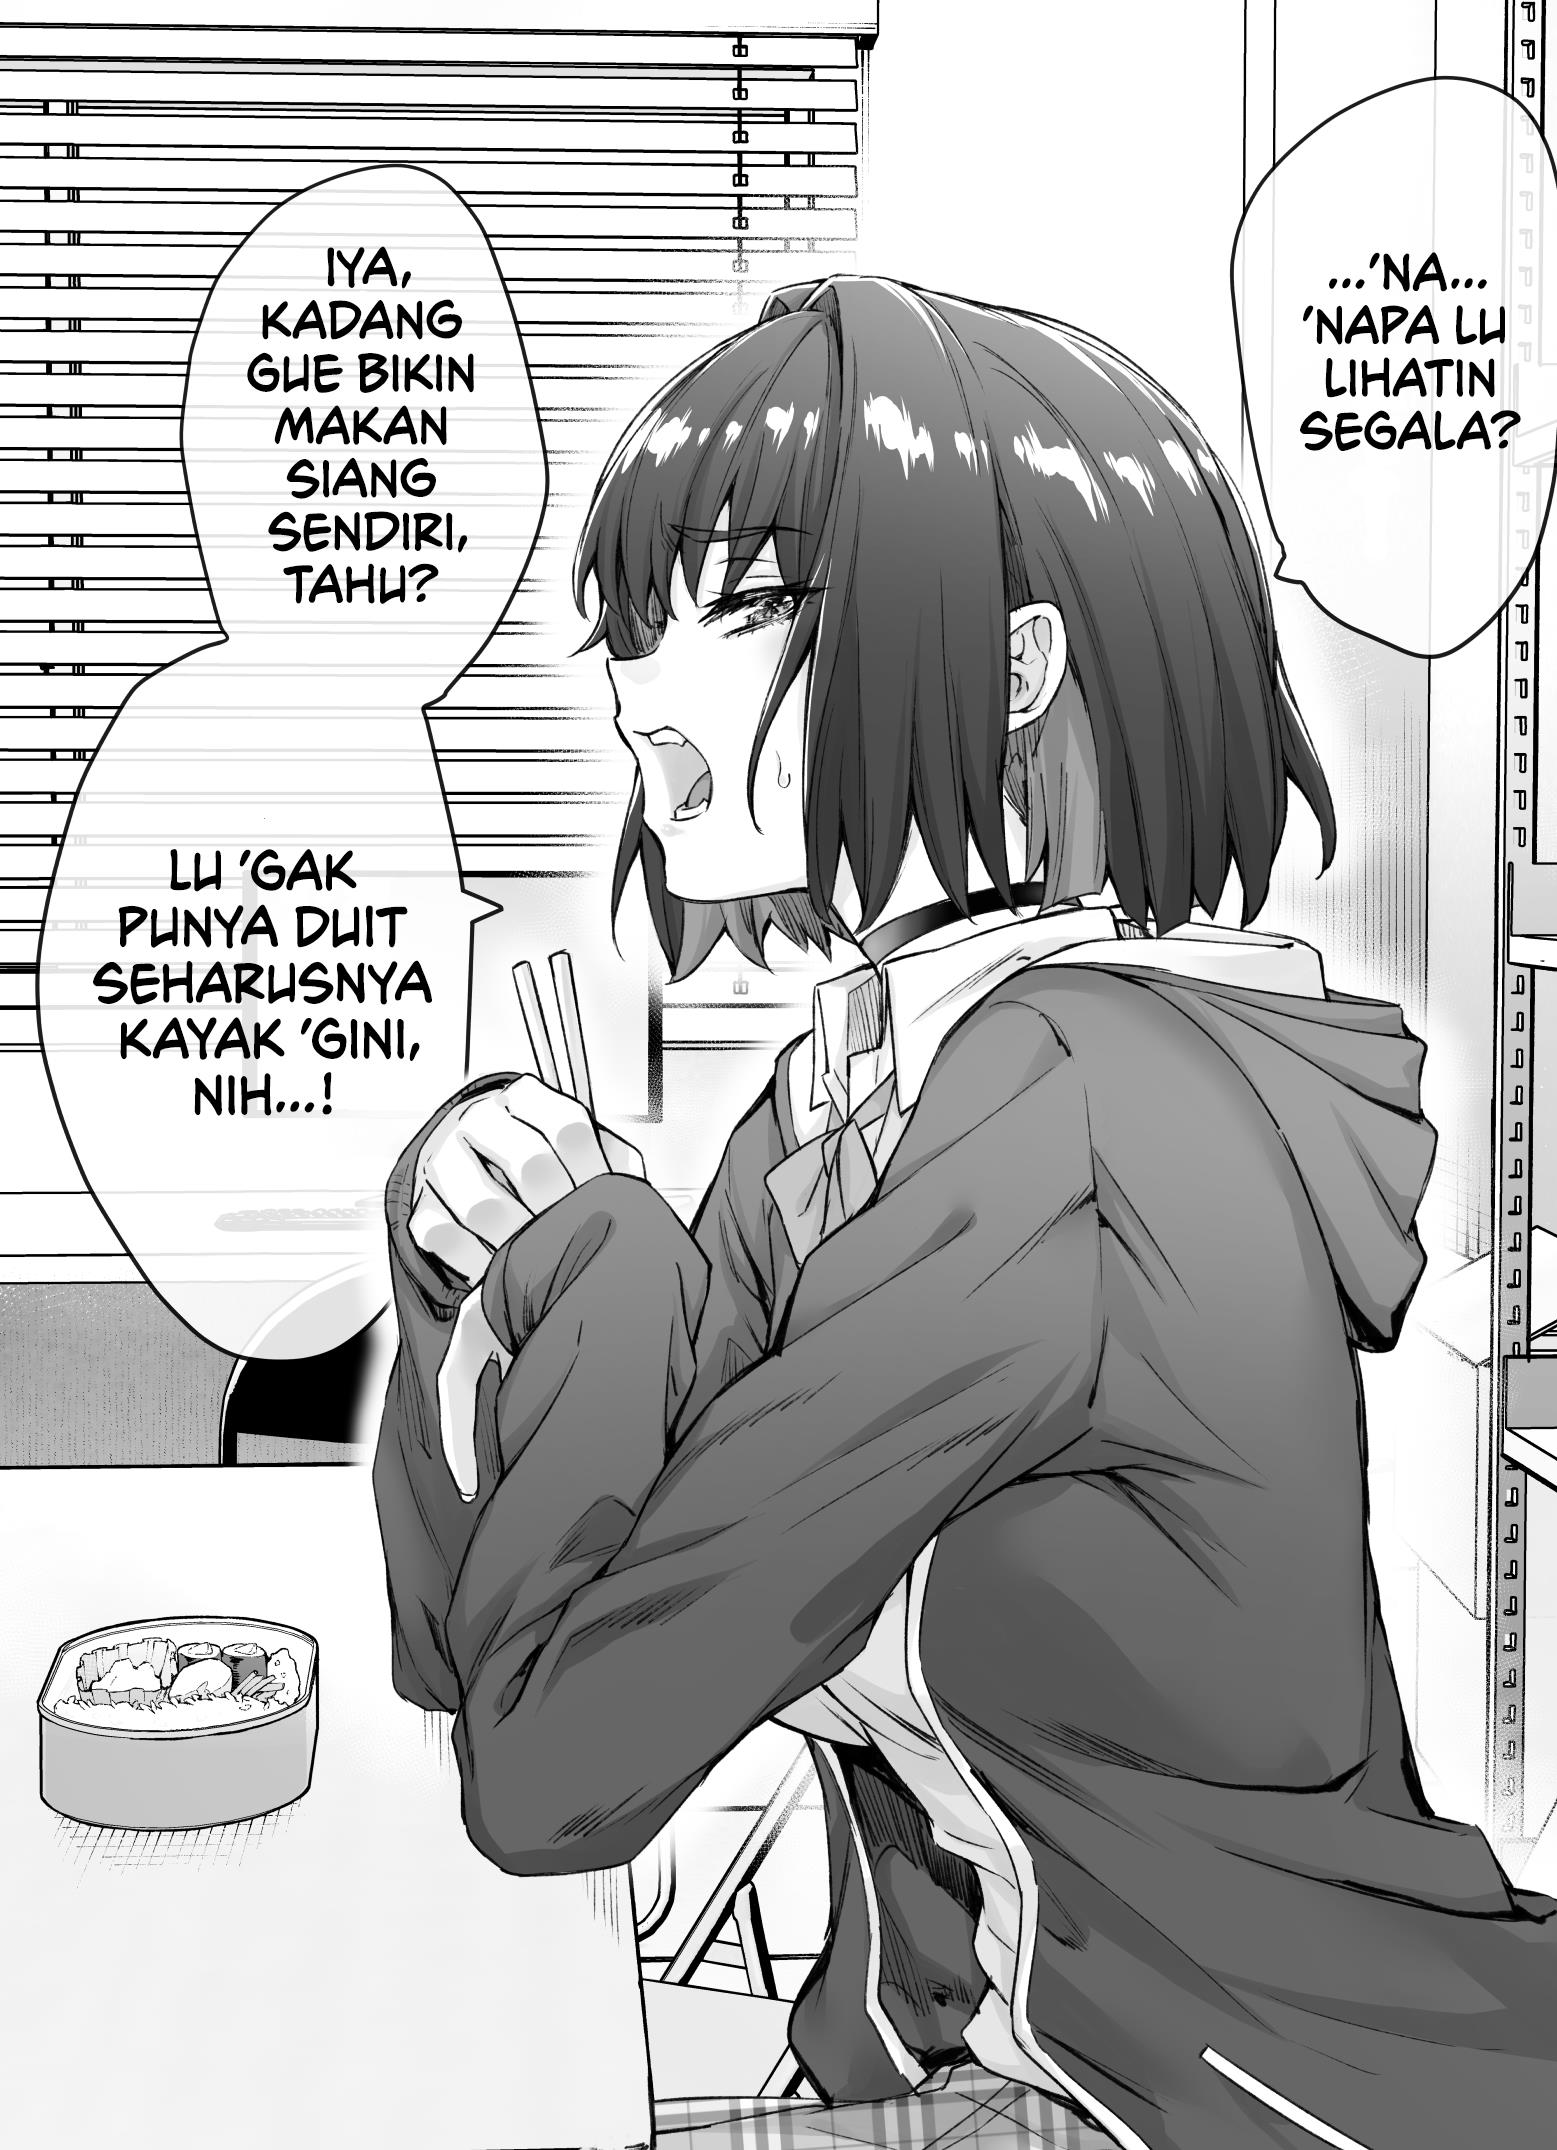 The Tsuntsuntsuntsuntsuntsun tsuntsuntsuntsuntsundere Girl Getting Less and Less Tsun Day by Day Chapter 17.2